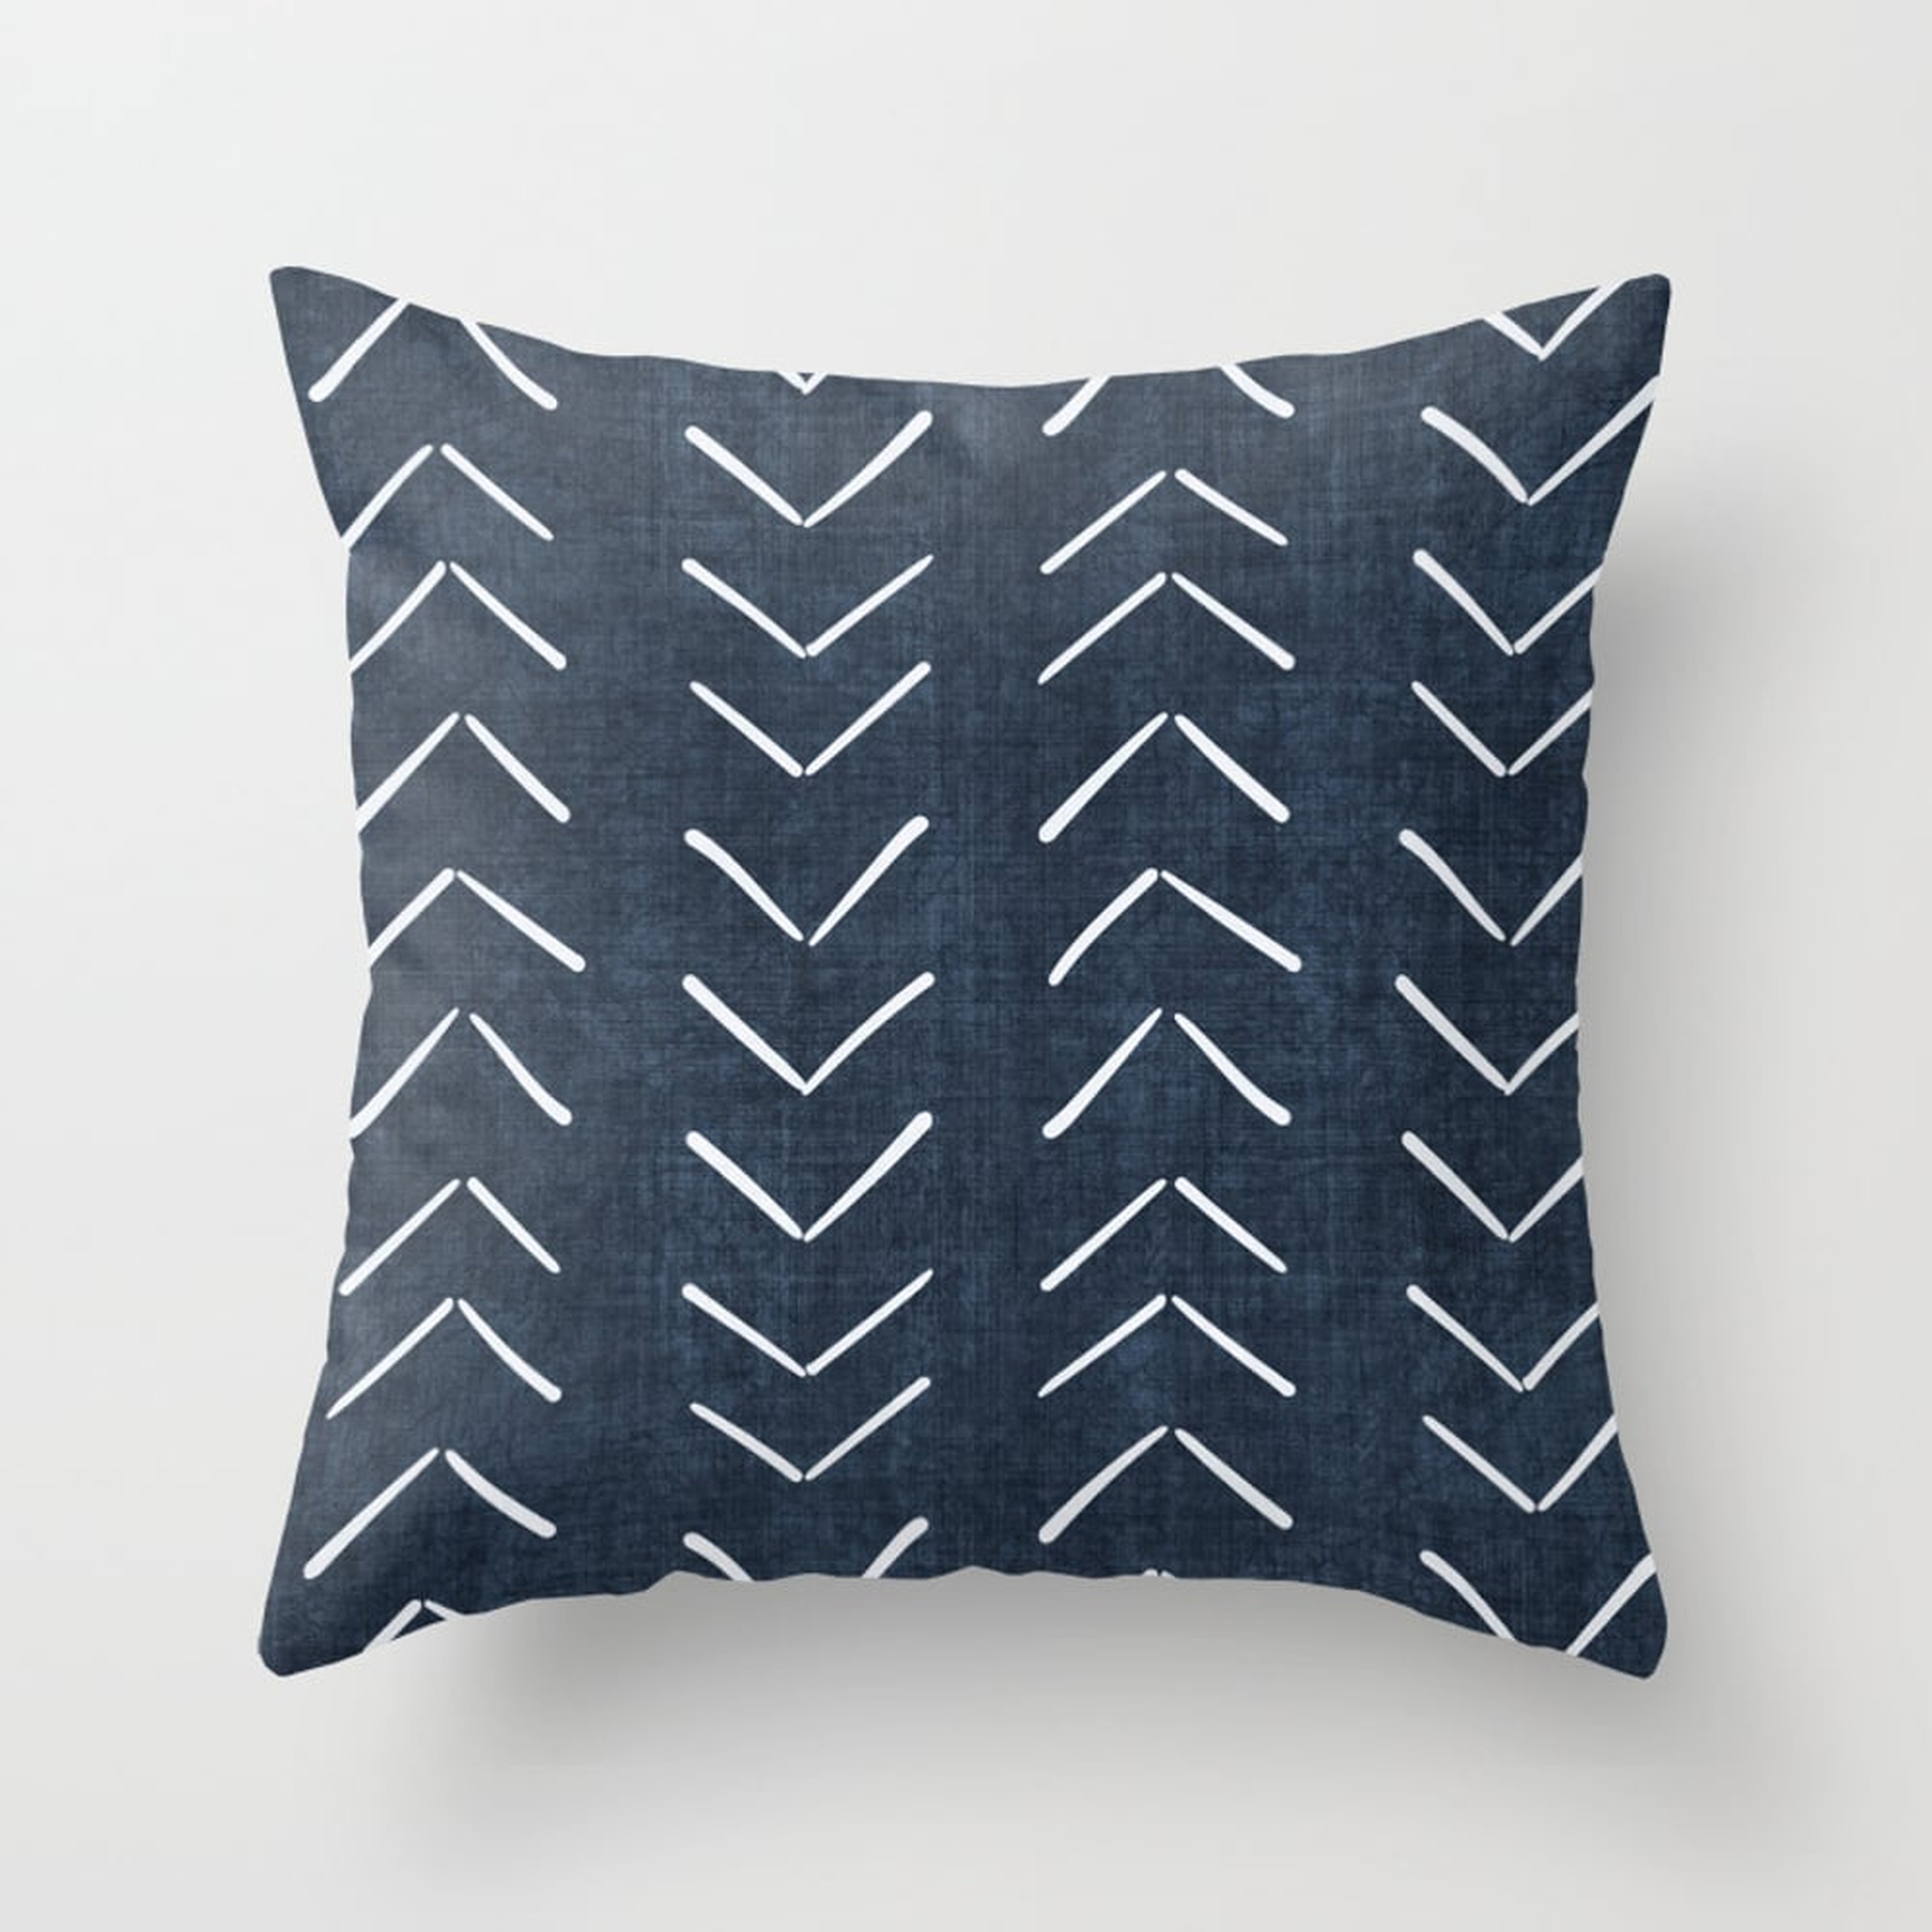 Boho Big Arrows In Navy Throw Pillow by House Of Haha - Cover (18" x 18") With Pillow Insert - Indoor Pillow - Society6